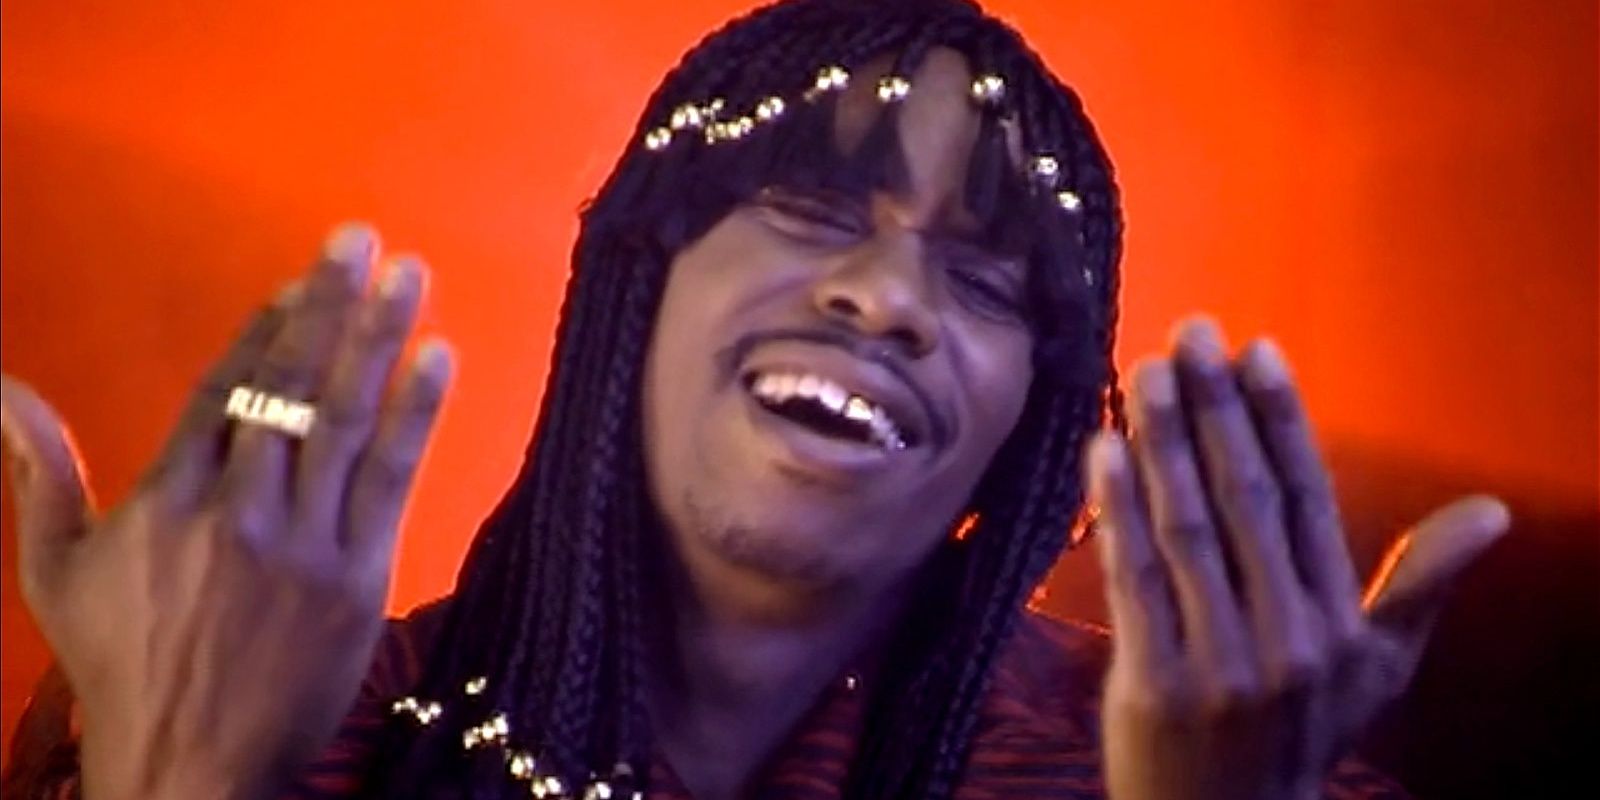 Dave Chappelle with his hands up and his hair in beaded braids in Chappelle's Show.